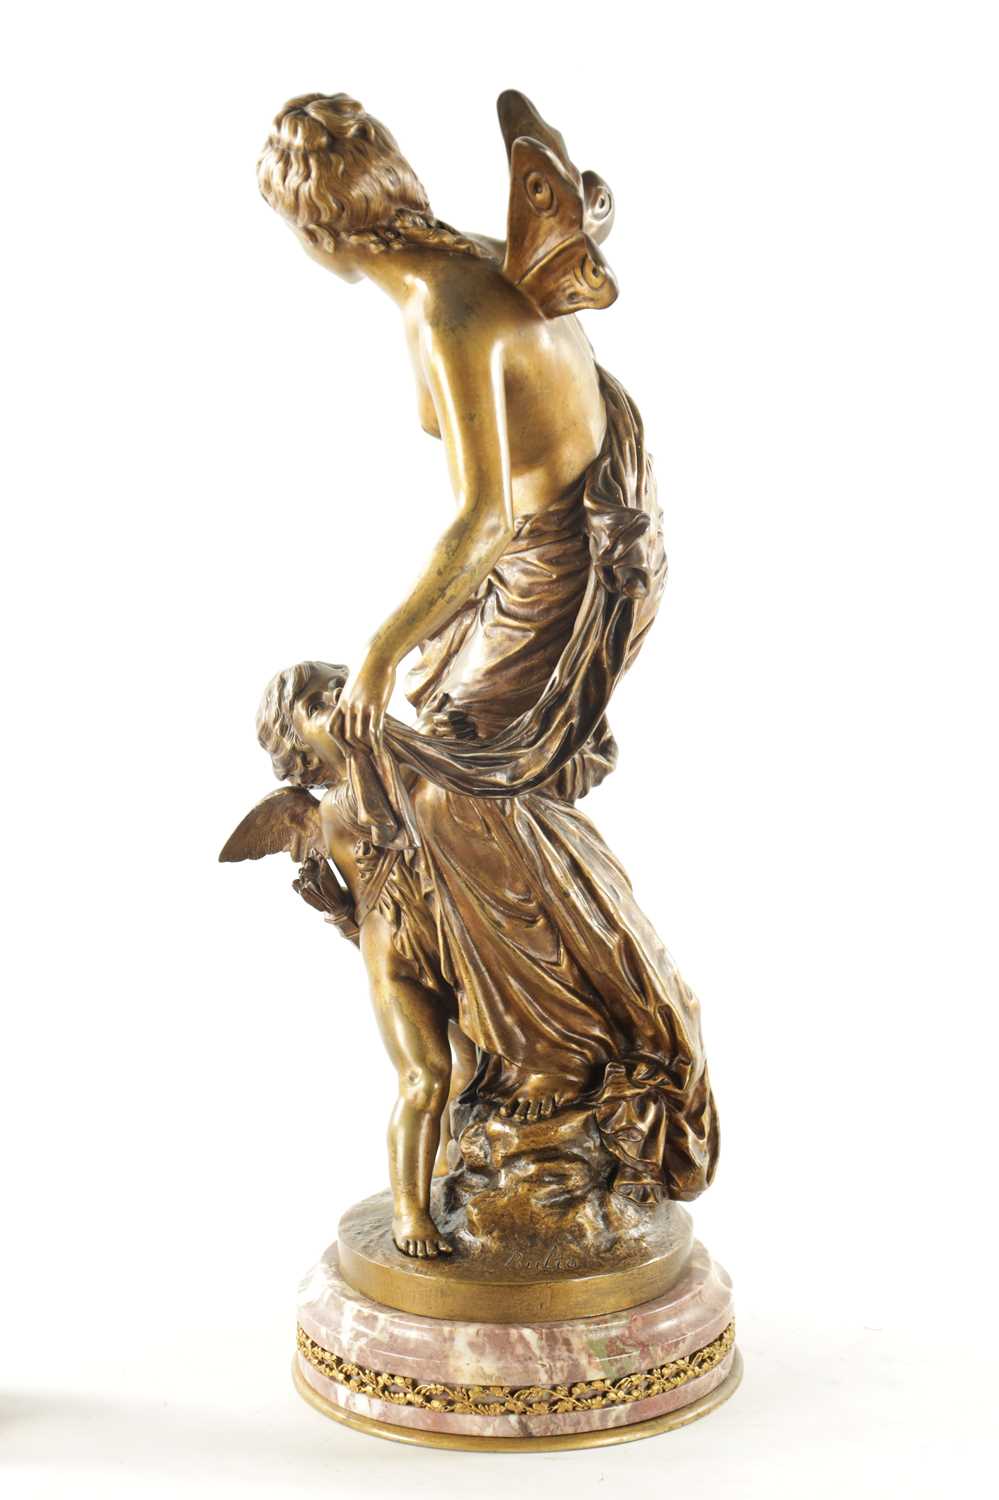 JEAN BULIO (FRENCH 1827 - 1911) A 19TH CENTURY GILT BRONZE FIGURE DEPICTING ‘PSYCHE AND LOVE’ - Image 7 of 8